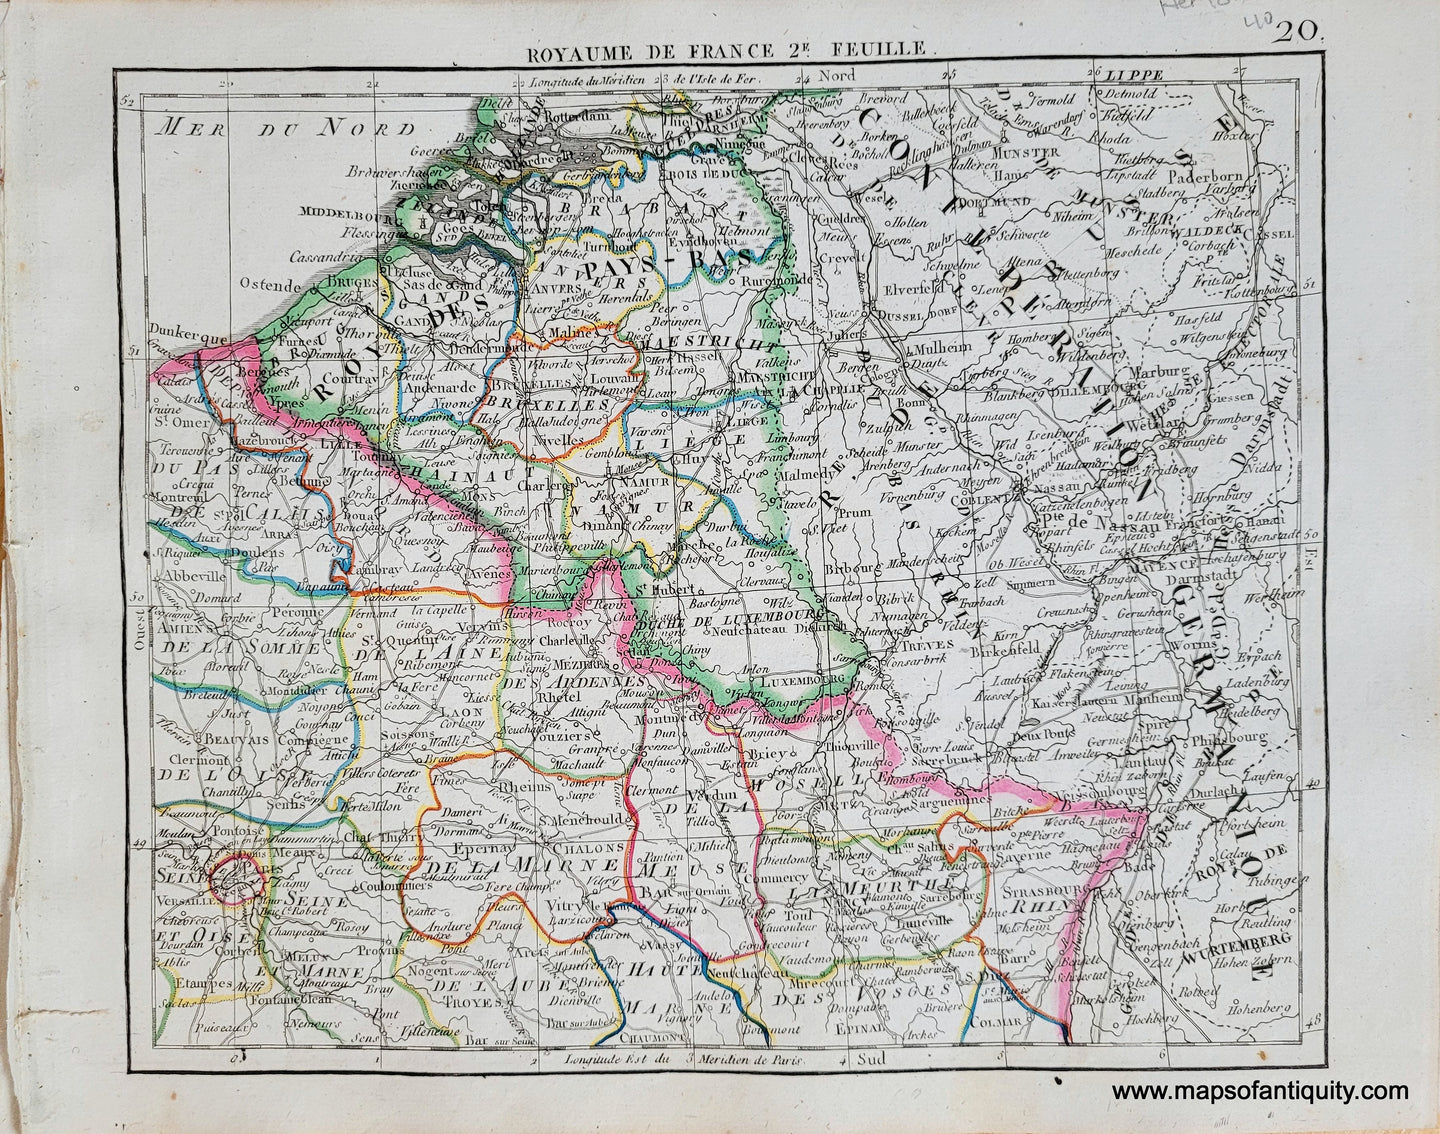 Genuine-Antique-Map-France-in-6-sheets-Sheet-2-Royaume-de-France-2e-Feuille-France-1816-Herisson-Maps-Of-Antiquity-1800s-19th-century